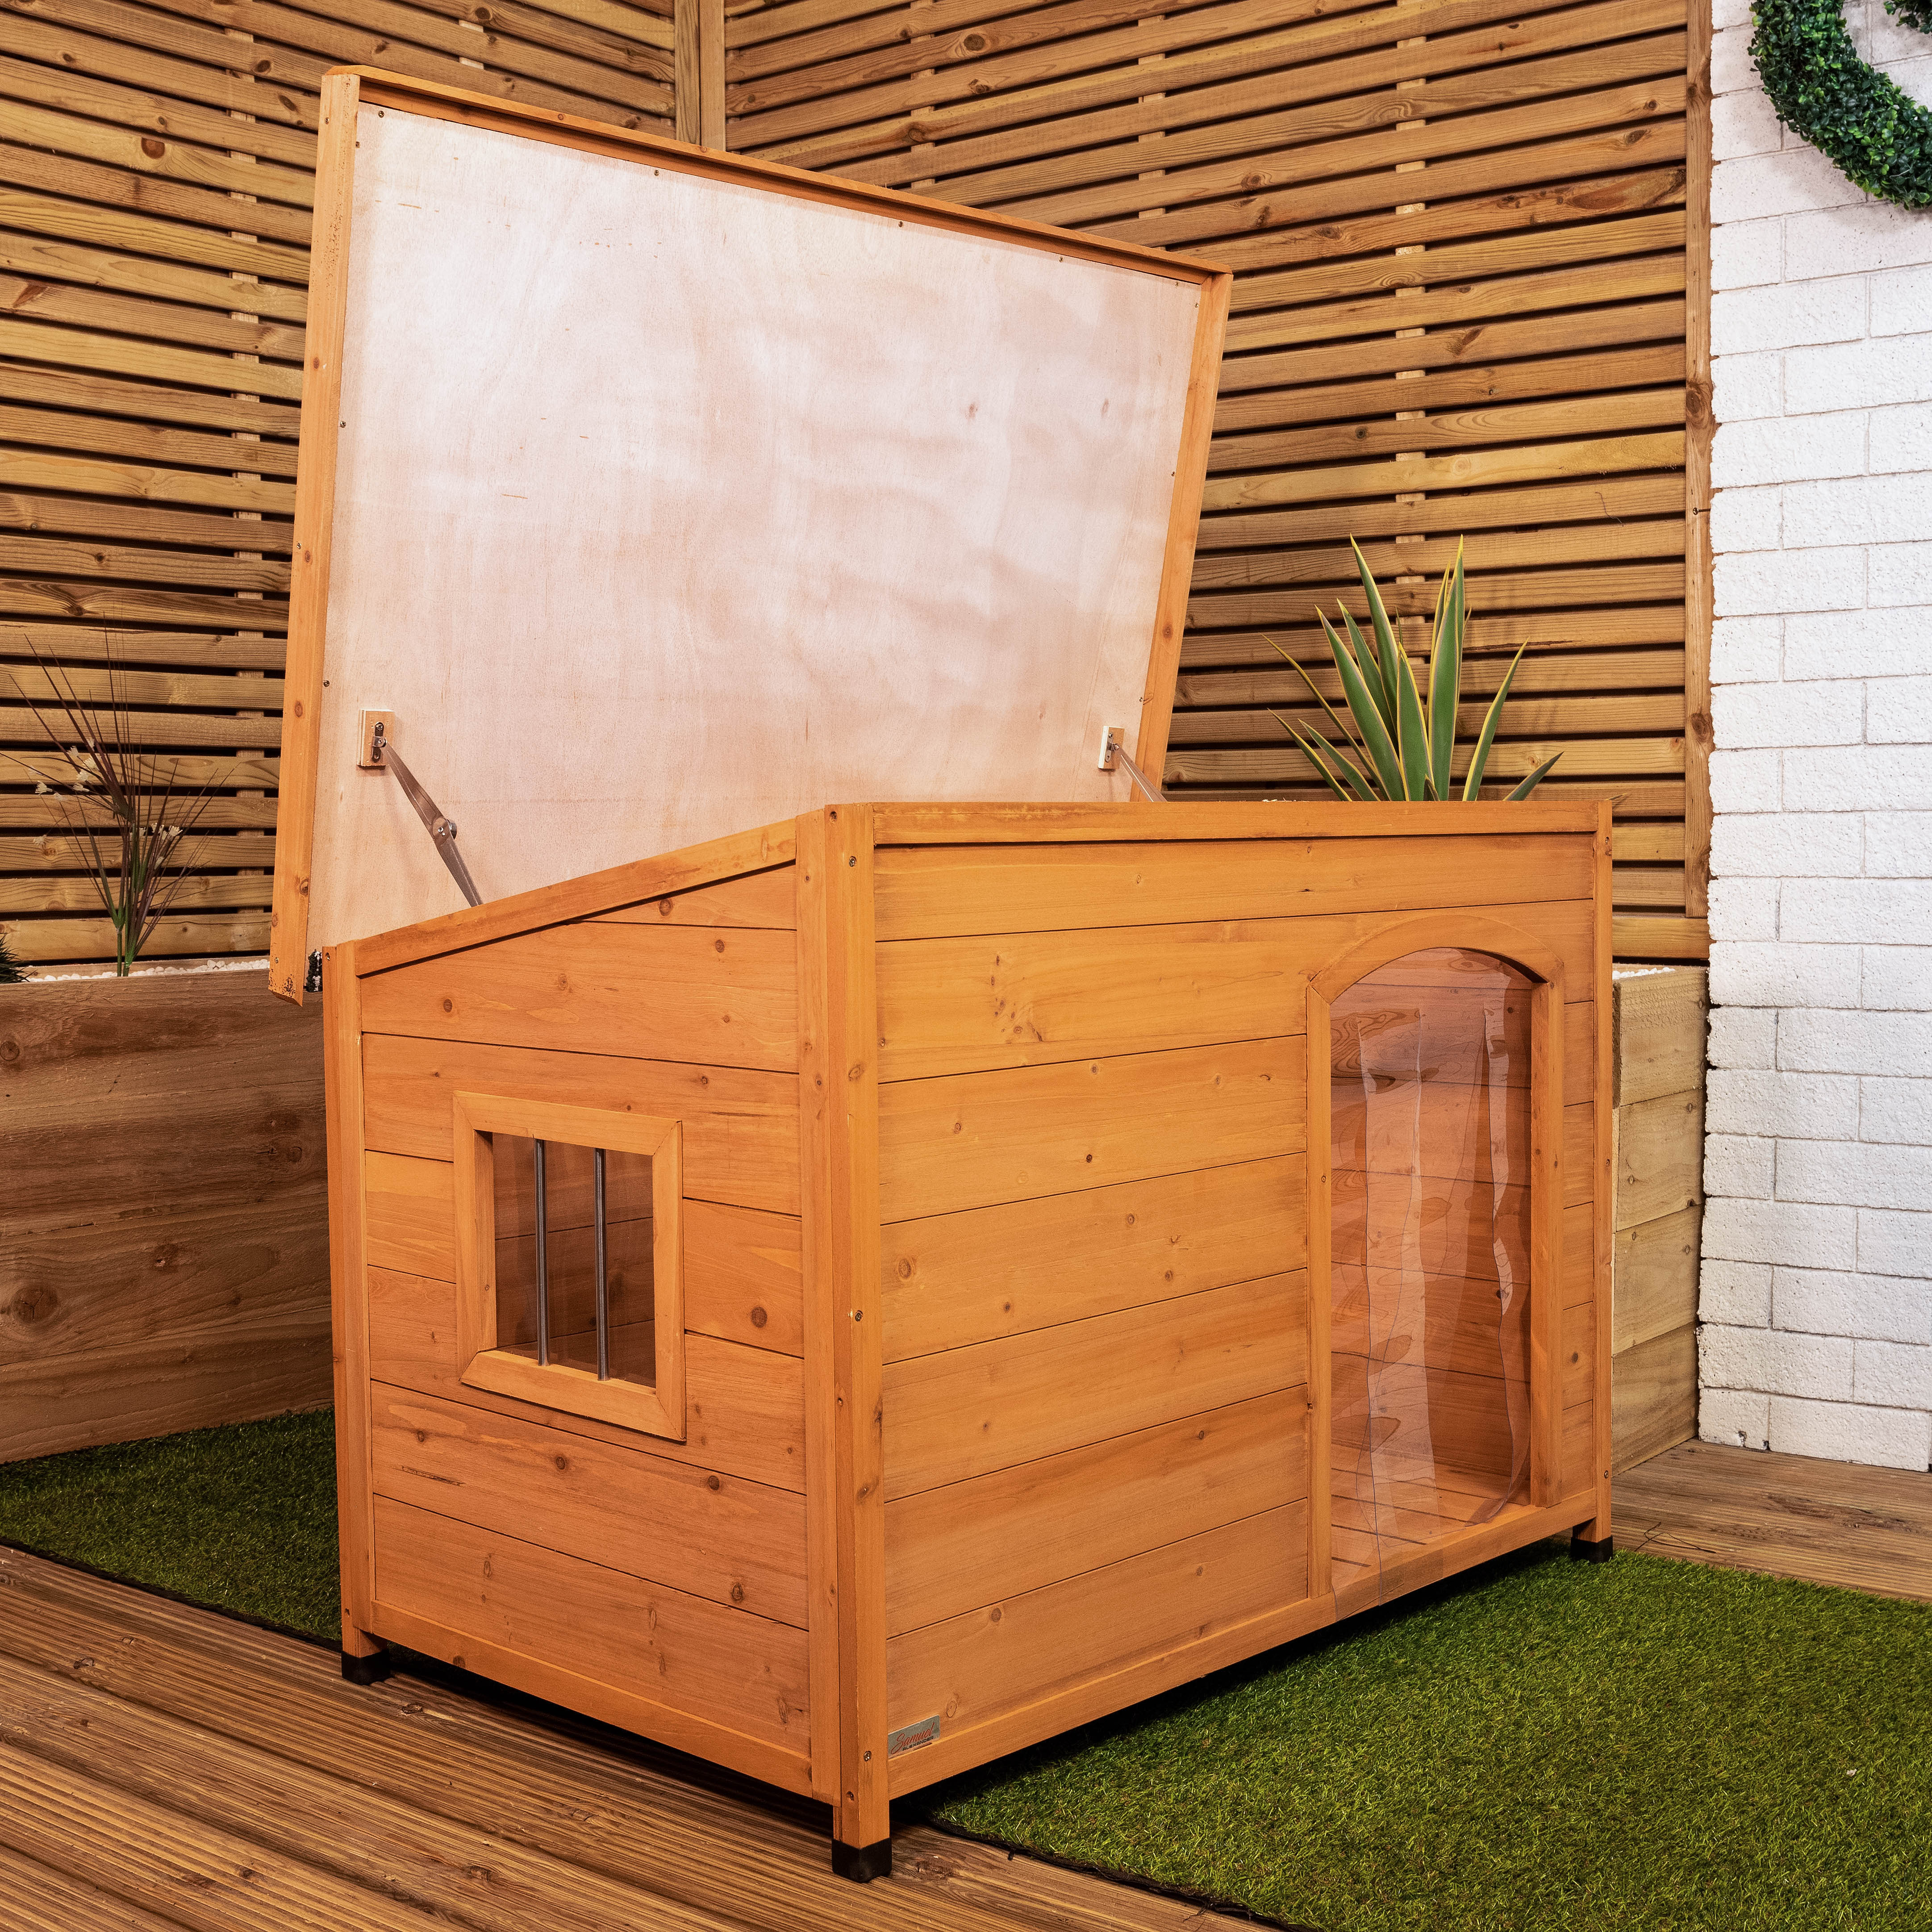 82cm x 1.16m Large Outdoor Garden Wooden Dog House Kennel with Window